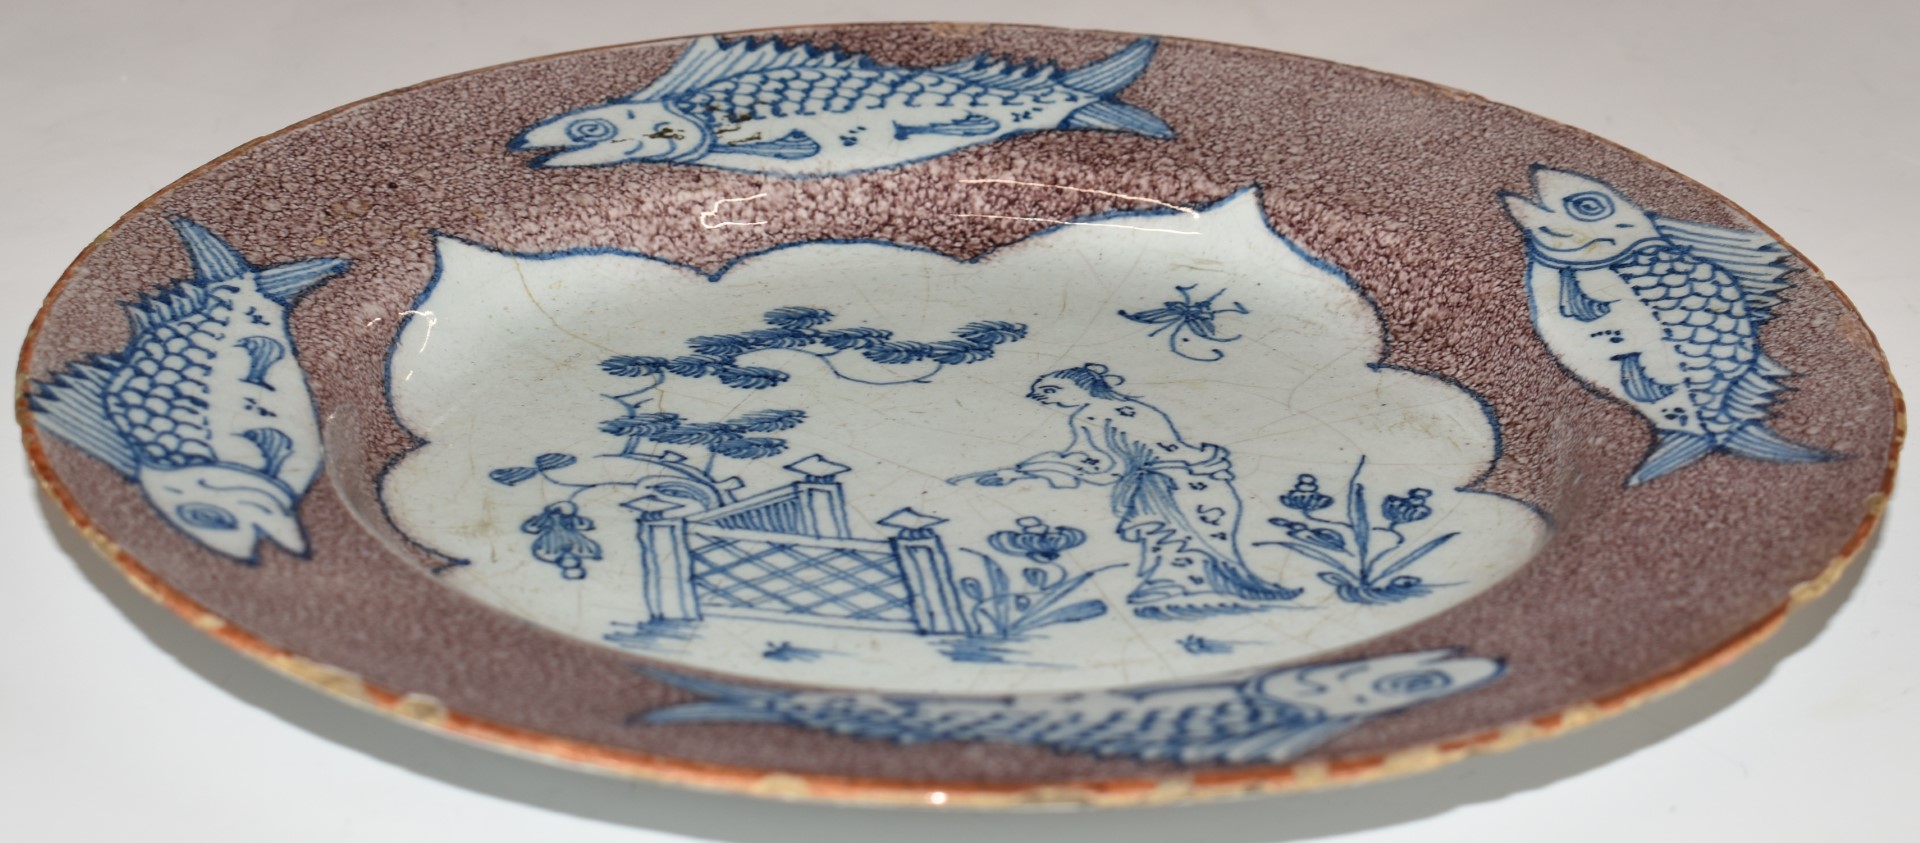 English Delft plate, London c1750, decorated with a chinoiserie garden scene within a border of four - Image 2 of 6